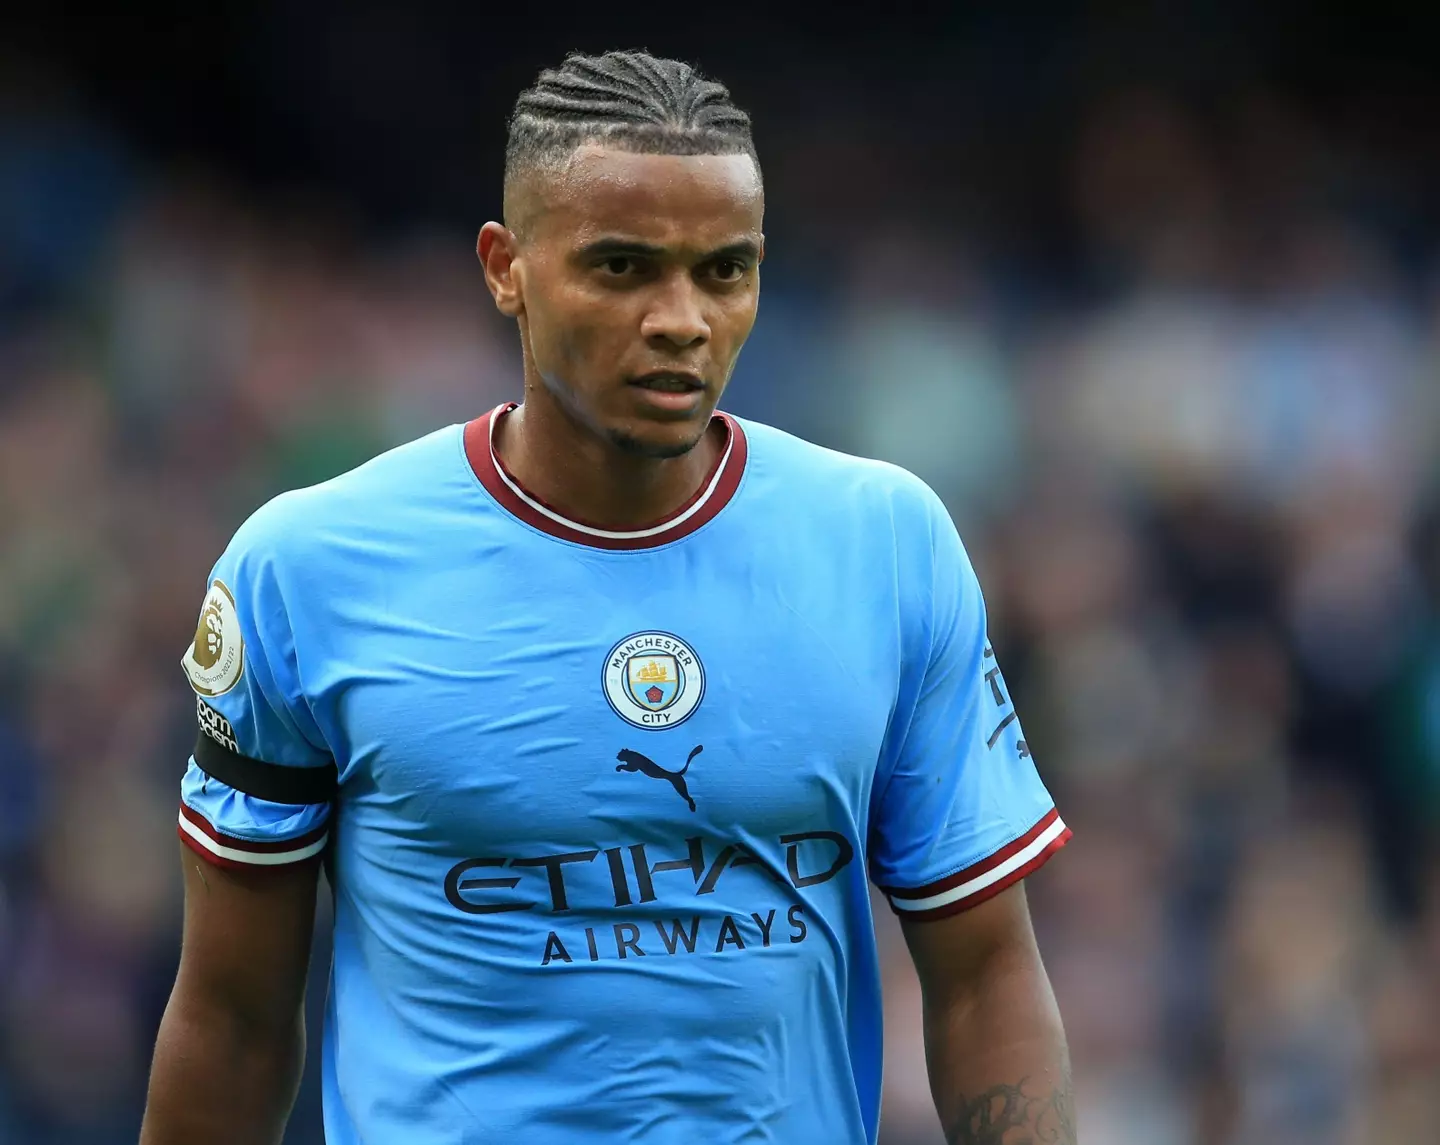 Akanji joined City from Dortmund last month (Image: Alamy)